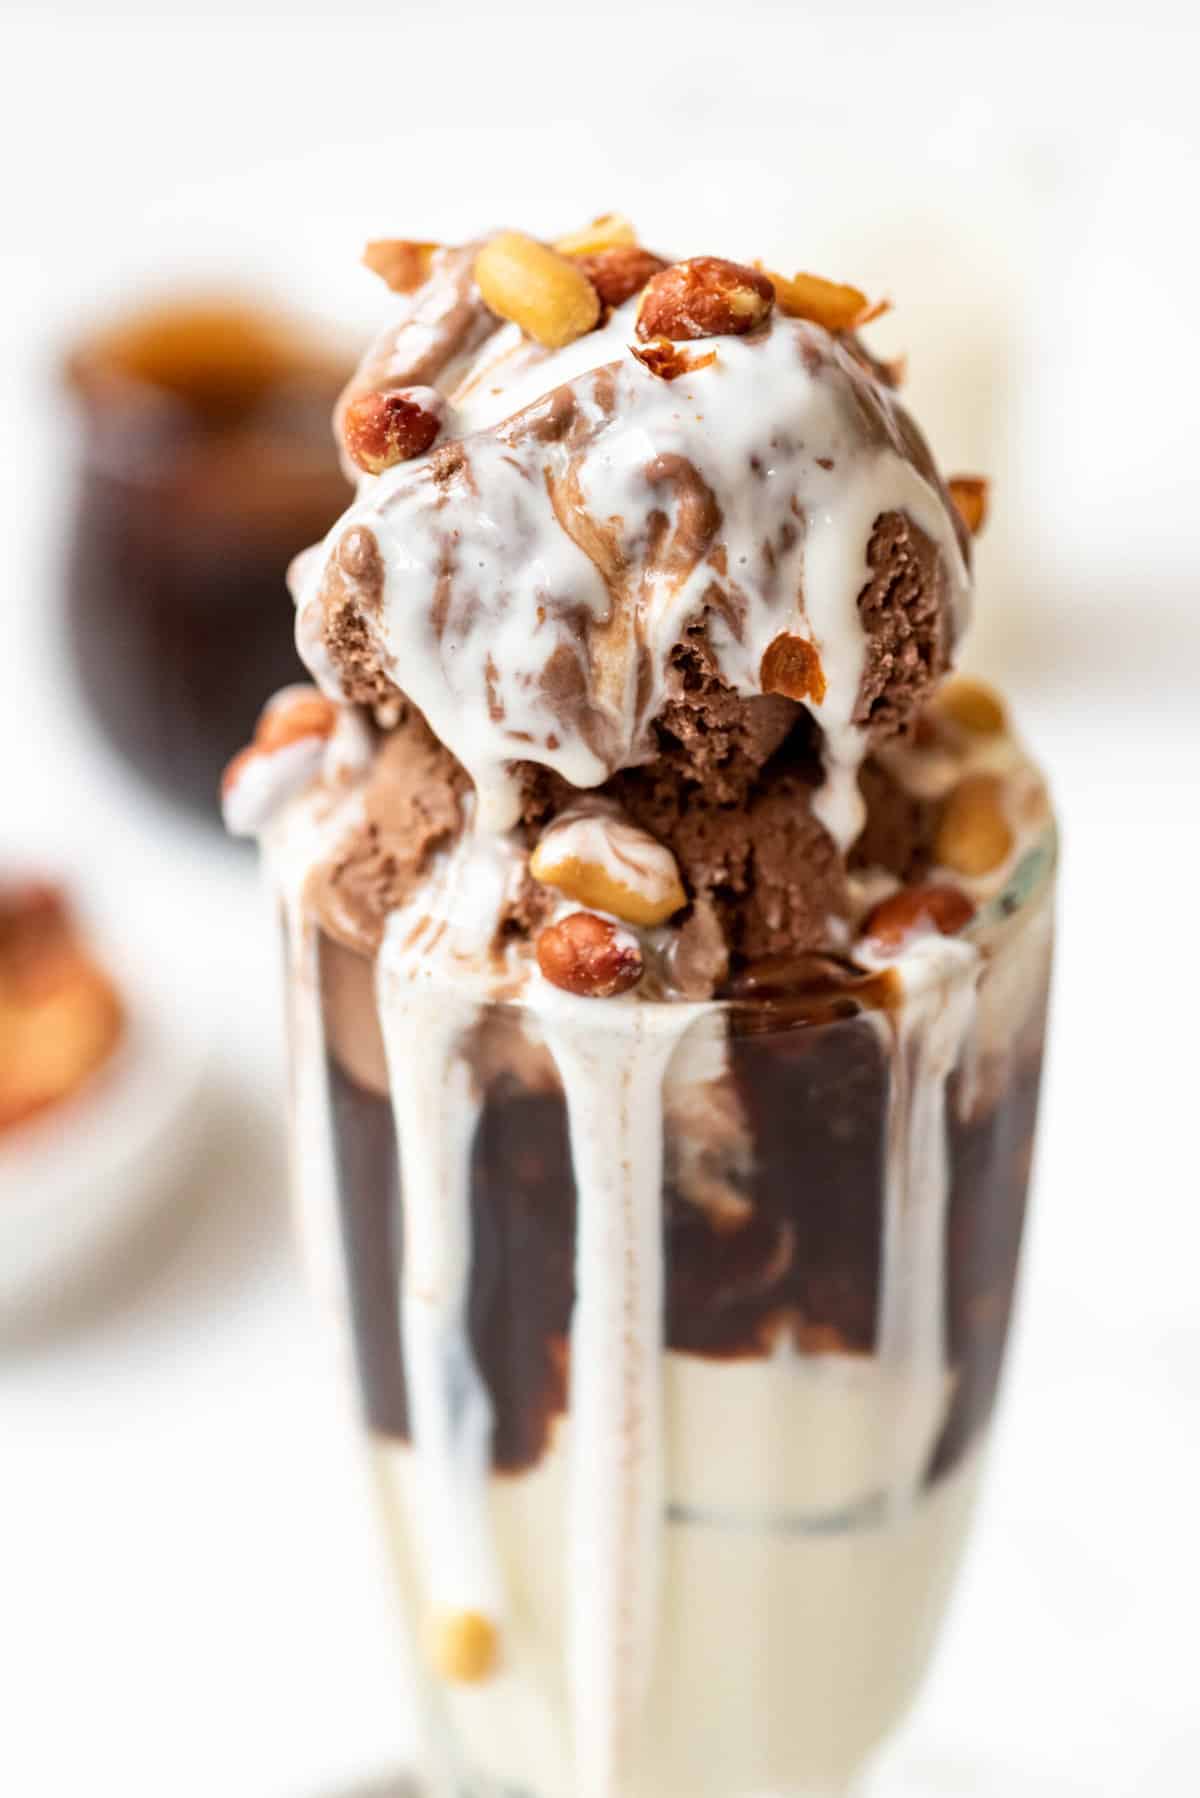 An image of the layers of a tin roof sundae.